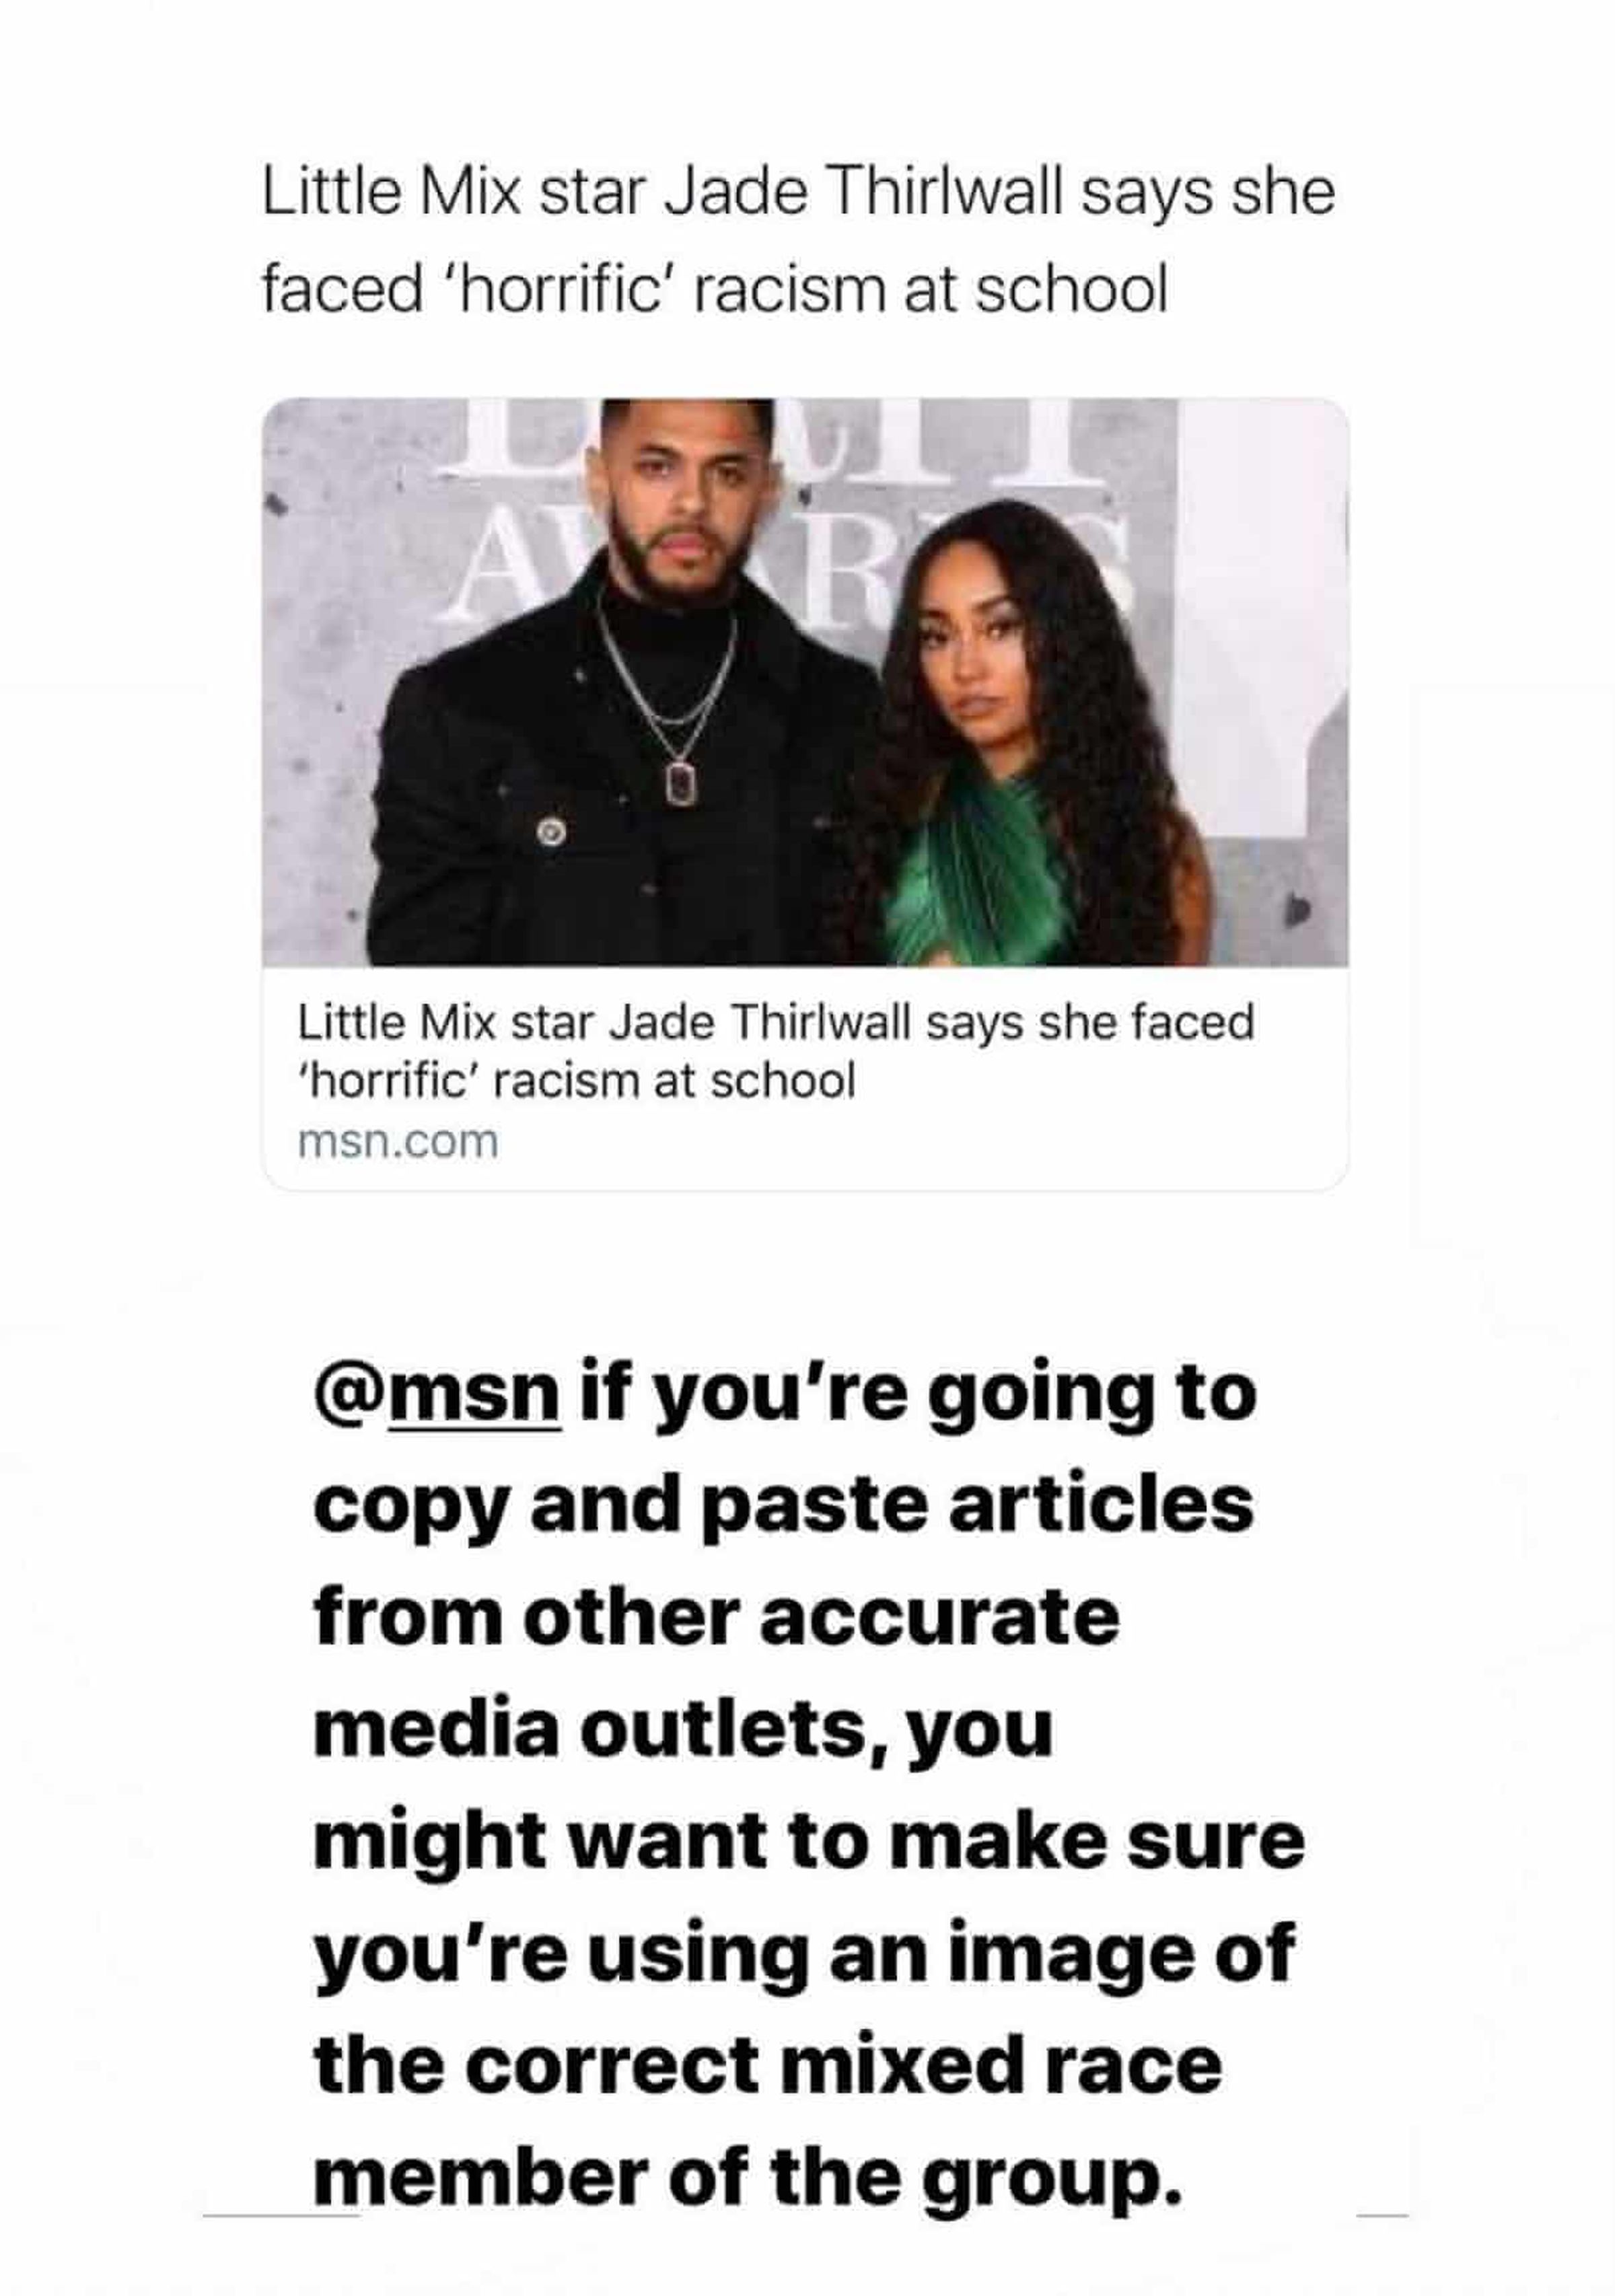 Thirlwall called on MSN on her Instagram story, saying “this shit happens to @leighannepinnock and I ALL THE TIME.”